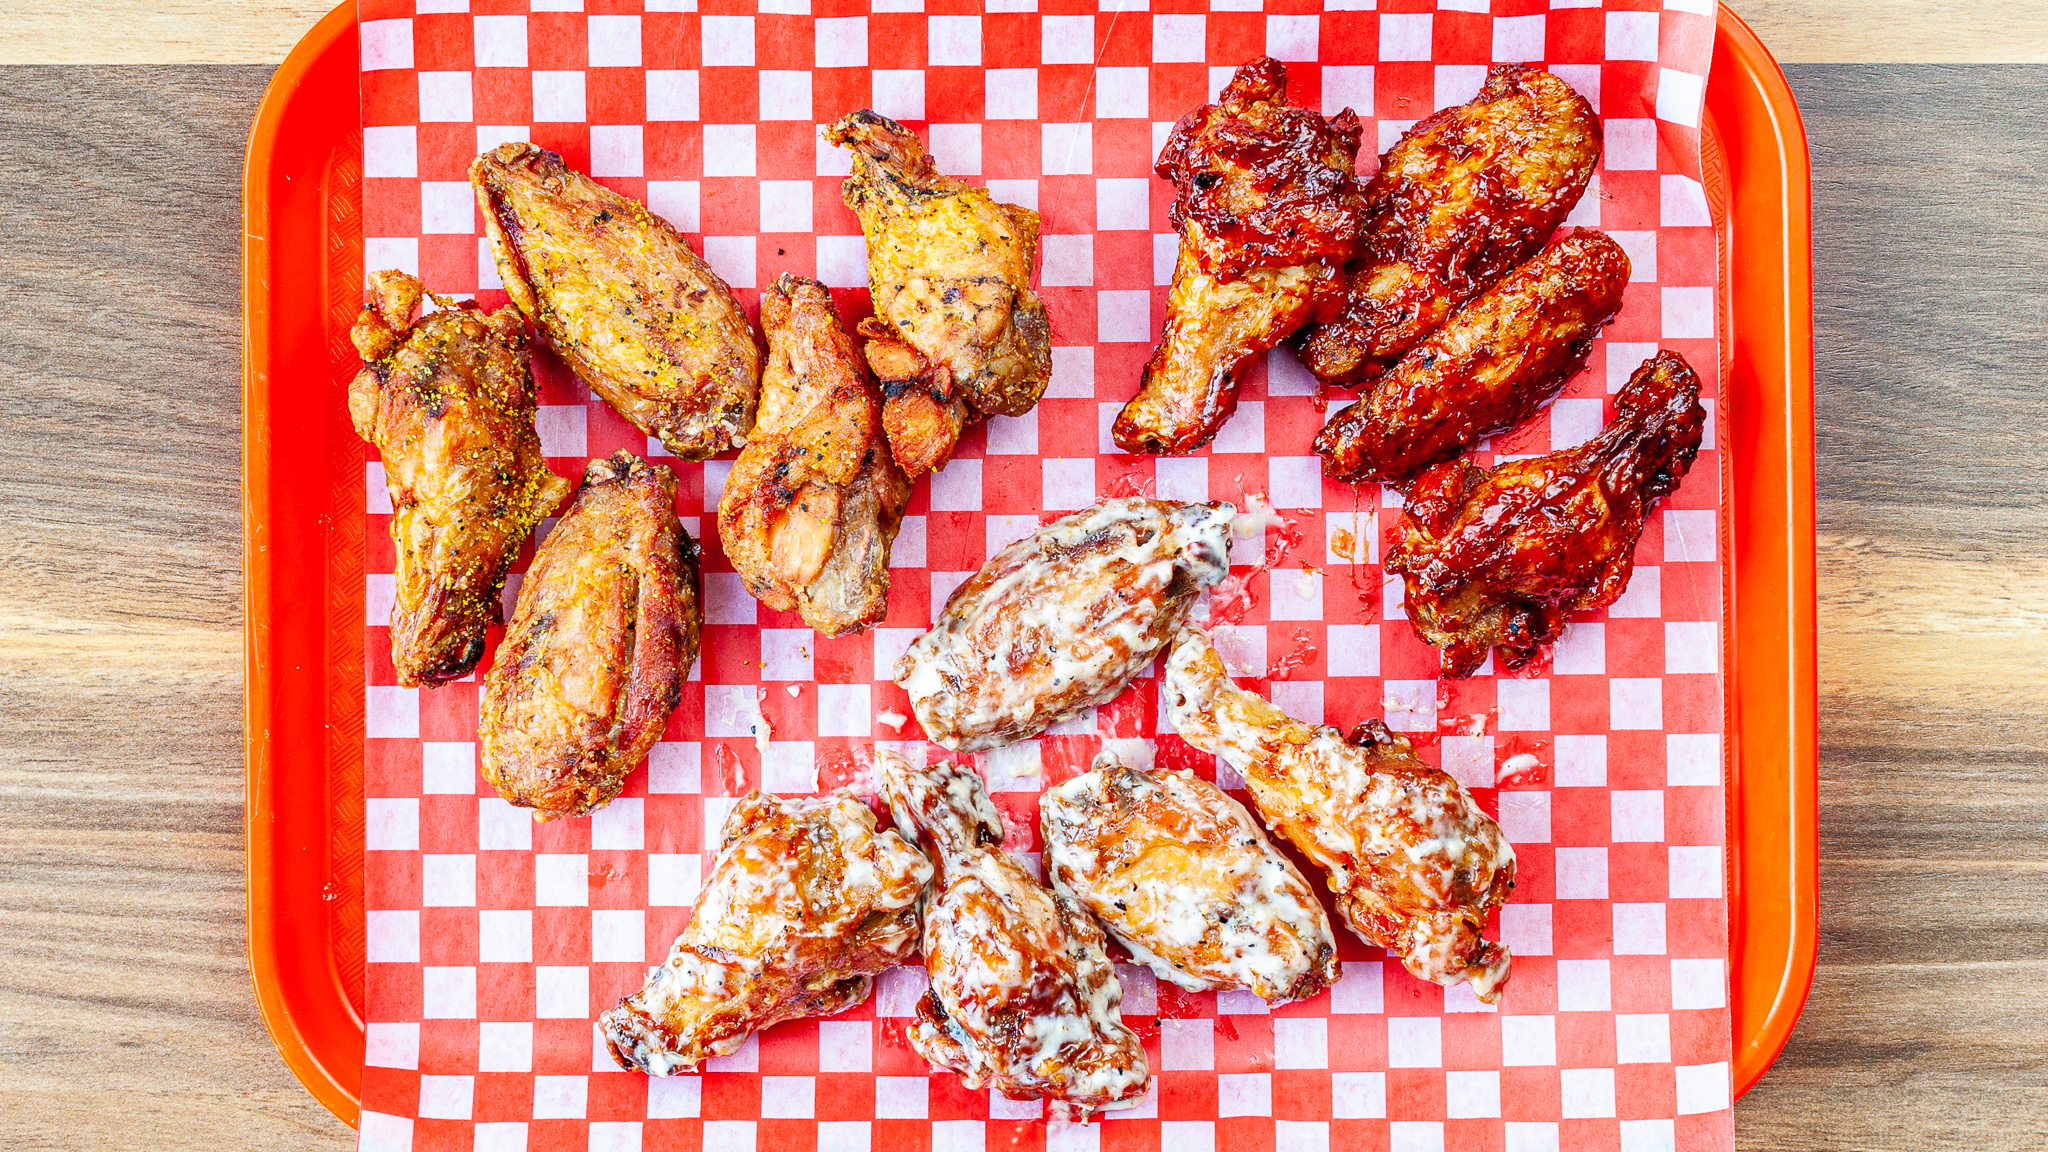 Prairie Dog Brewing's Smoked Chicken Wings - XL Size with 14 large, sauced or rubbed Canadian chicken wings, shown on a BBQ platter.